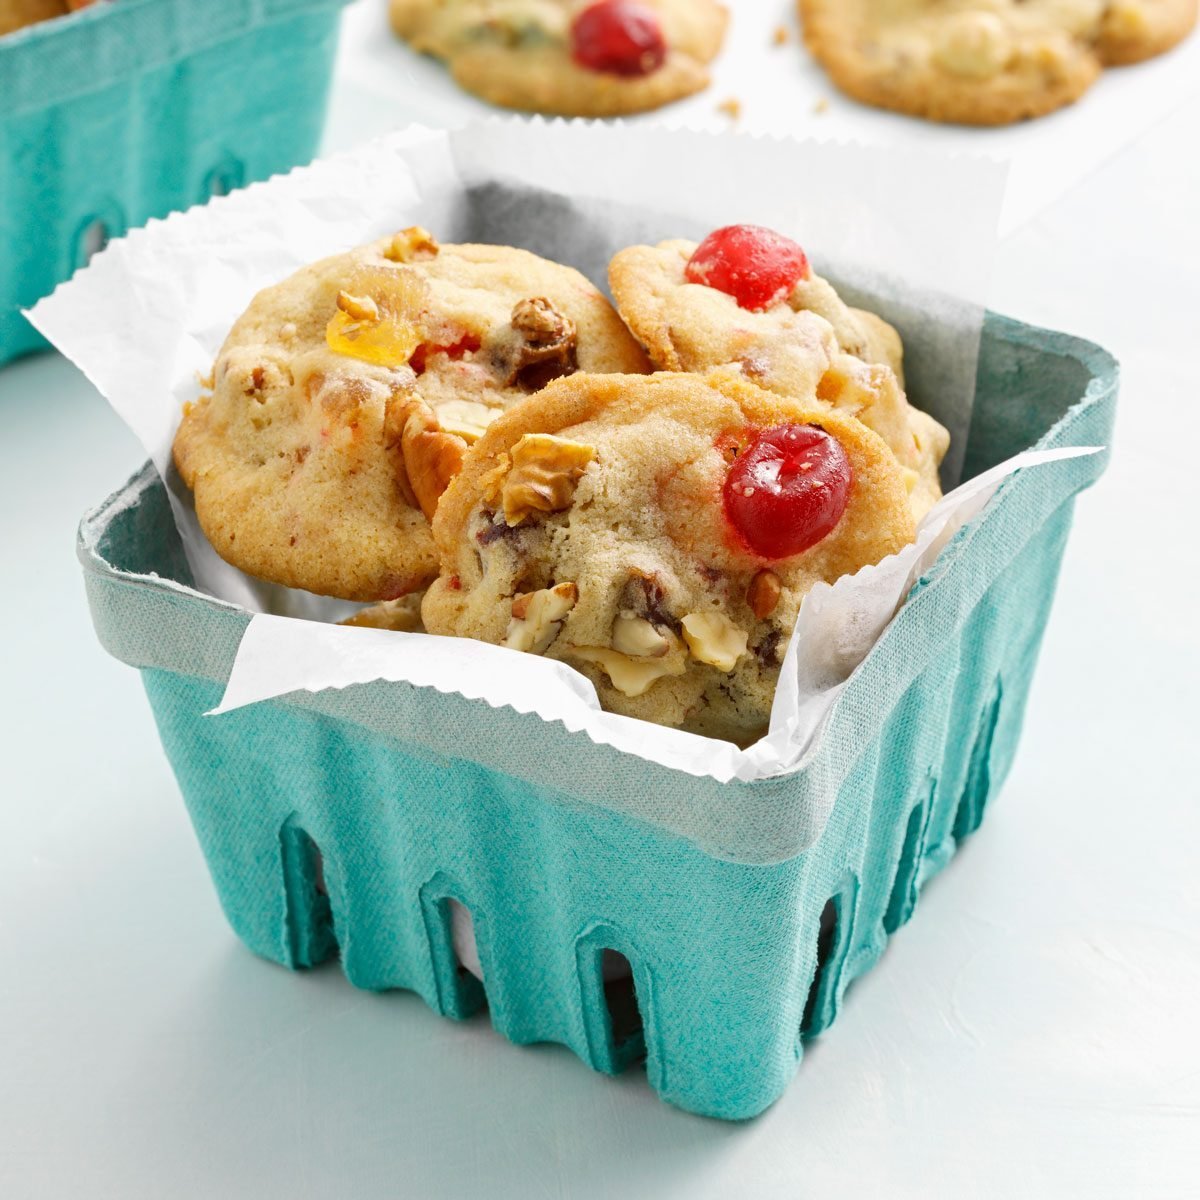 Fruitcake Cookies served in a teal produce quart container